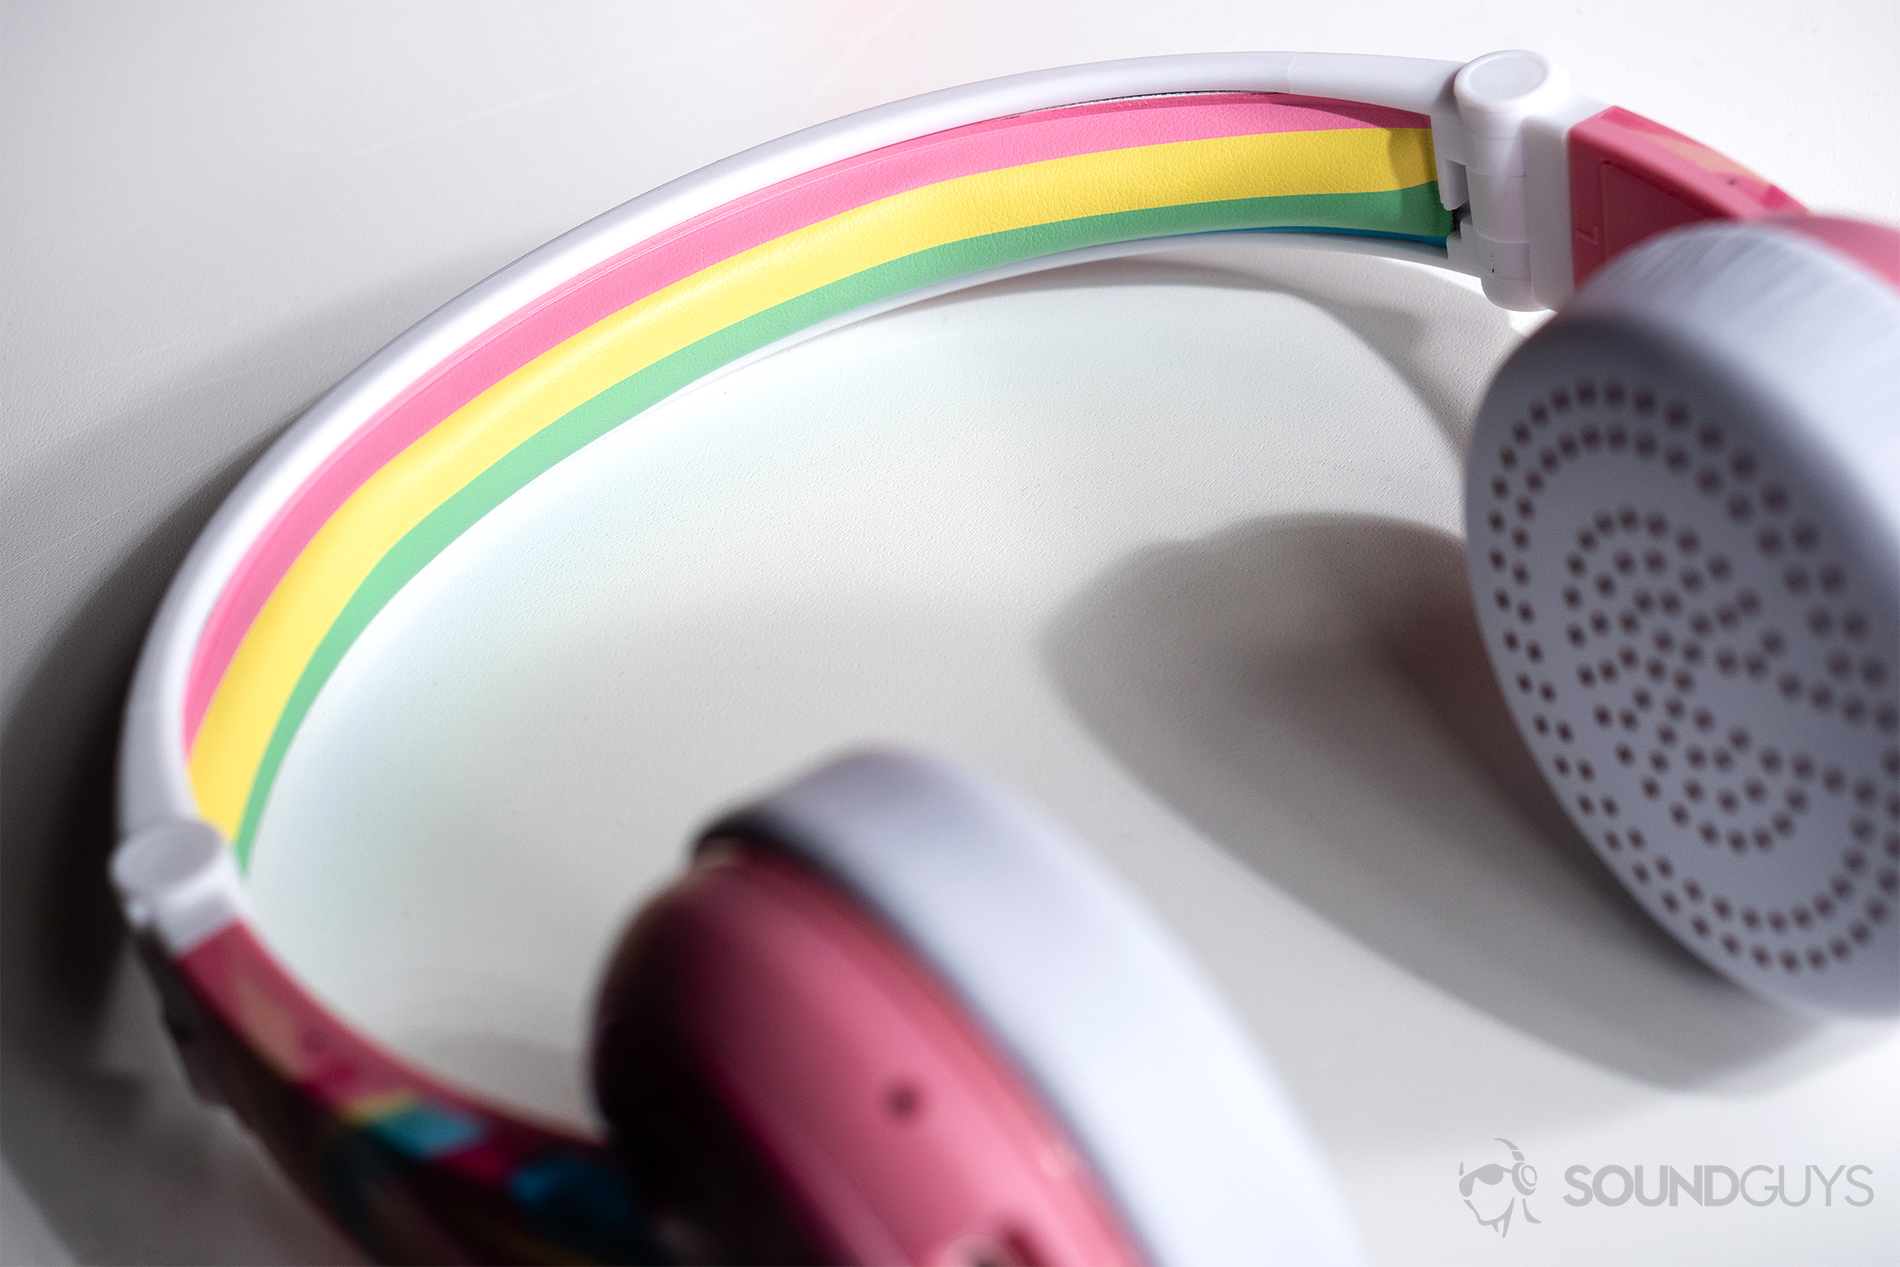 Buddyphones Wave: The interior of the headband, which features a colorful cushion.